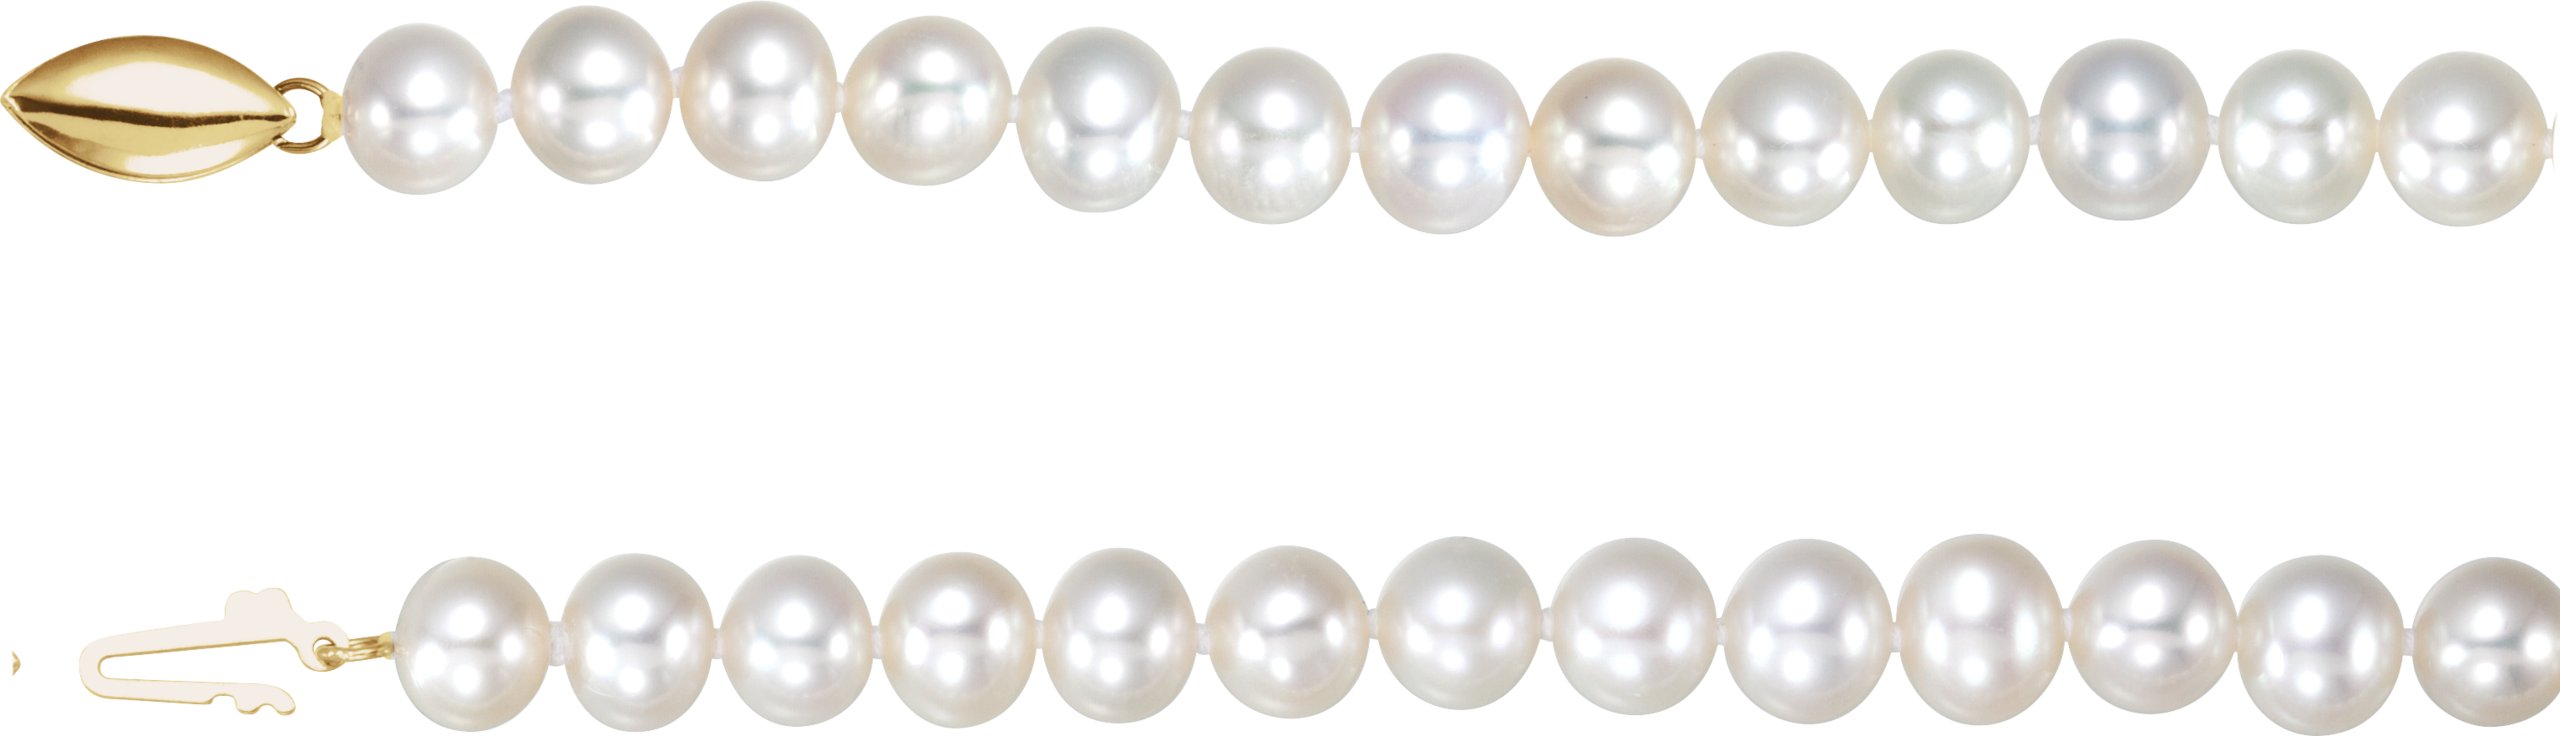 Panache Freshwater Cultured Pearl Strand 18 inch 6.5 to 7mm Ref 809013